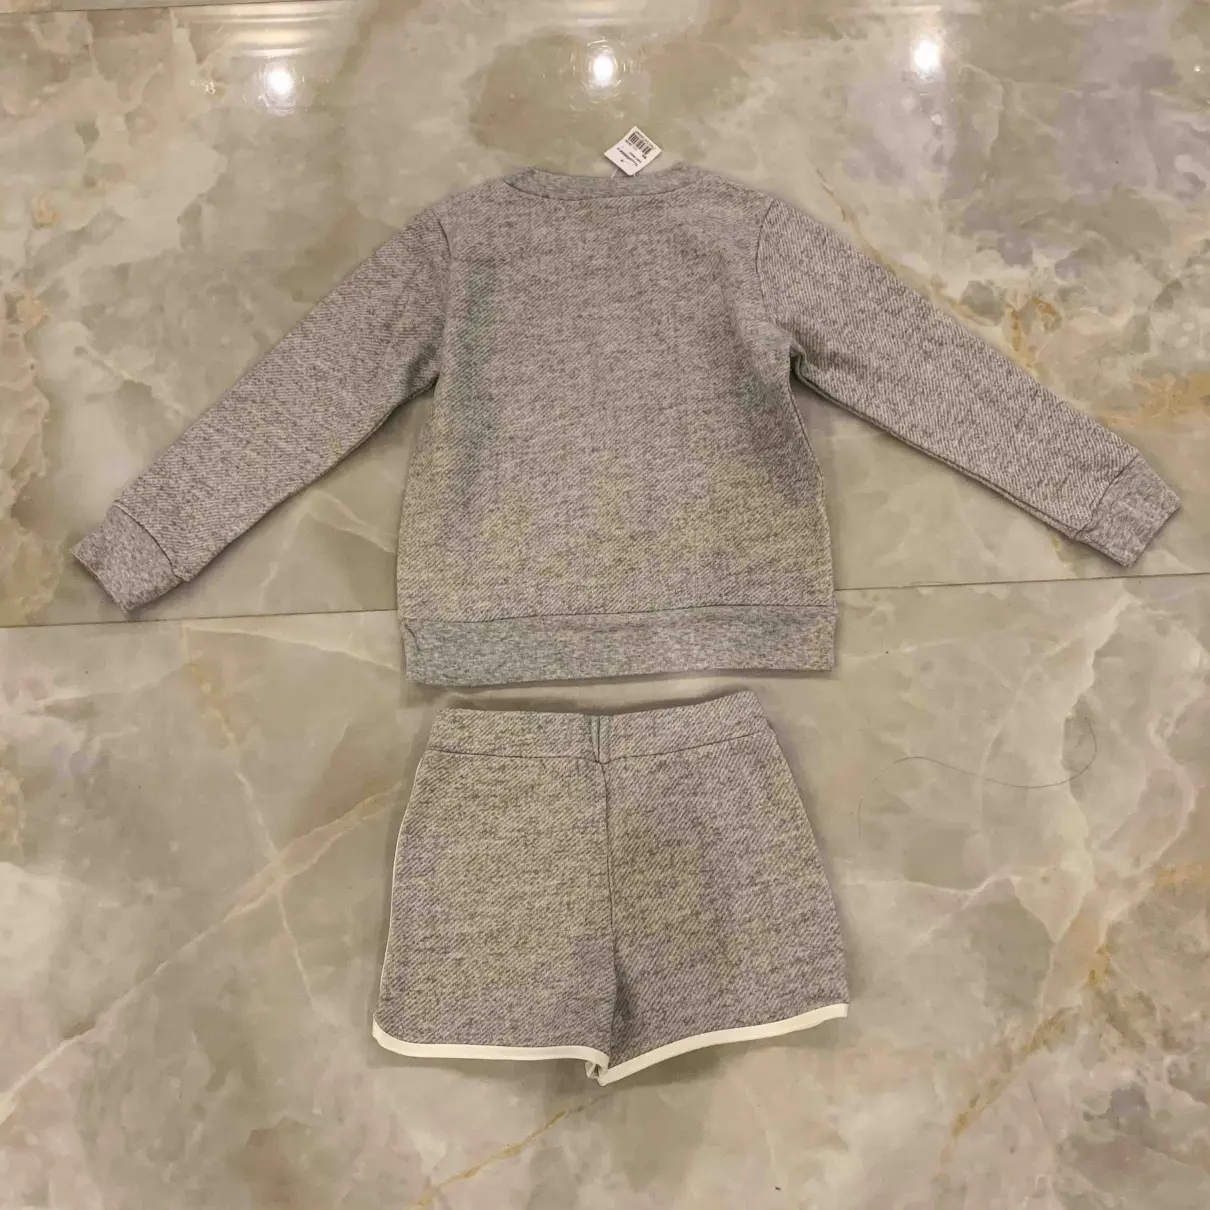 Luxury Bonpoint Outfits Kids